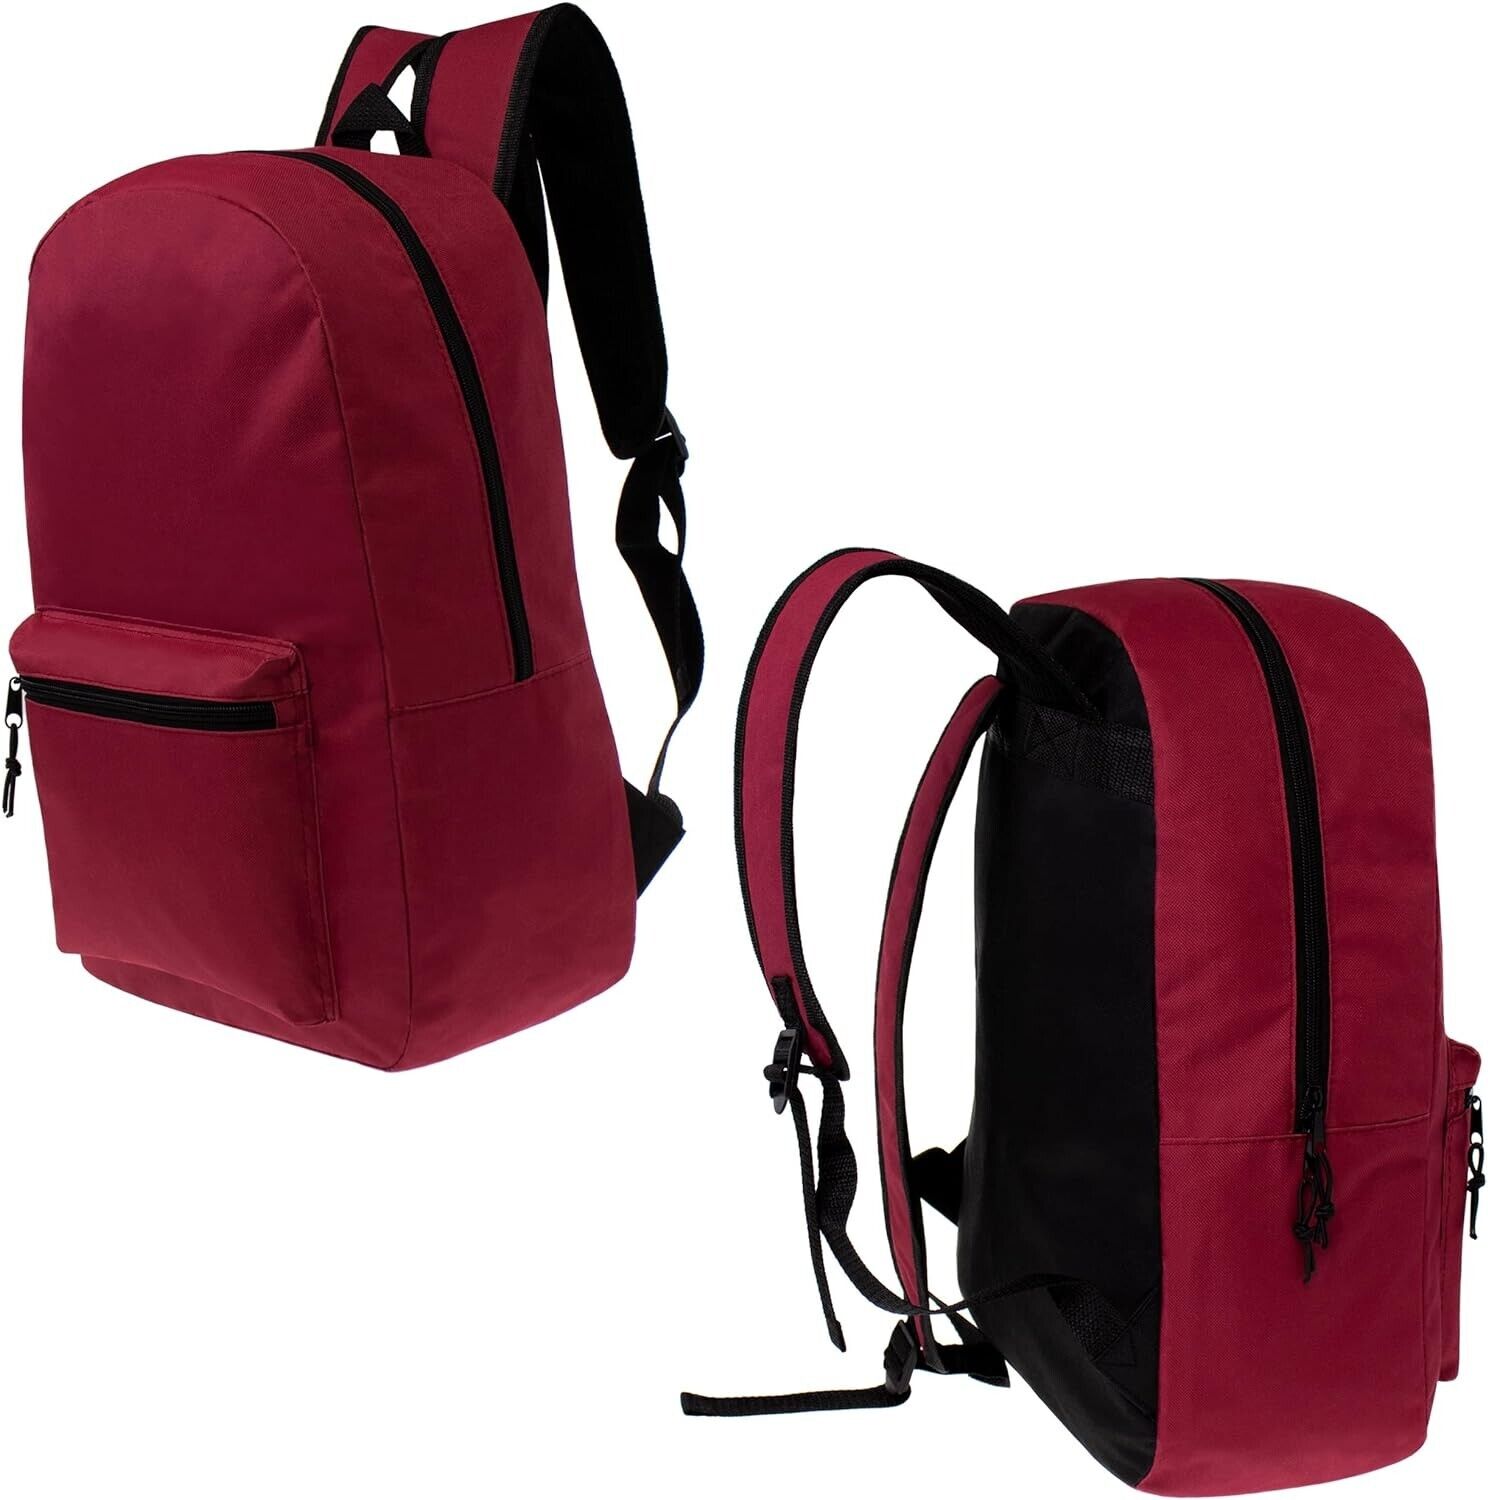 Red Basic Backpack School for Kids,for Elementary, Middle, and High School